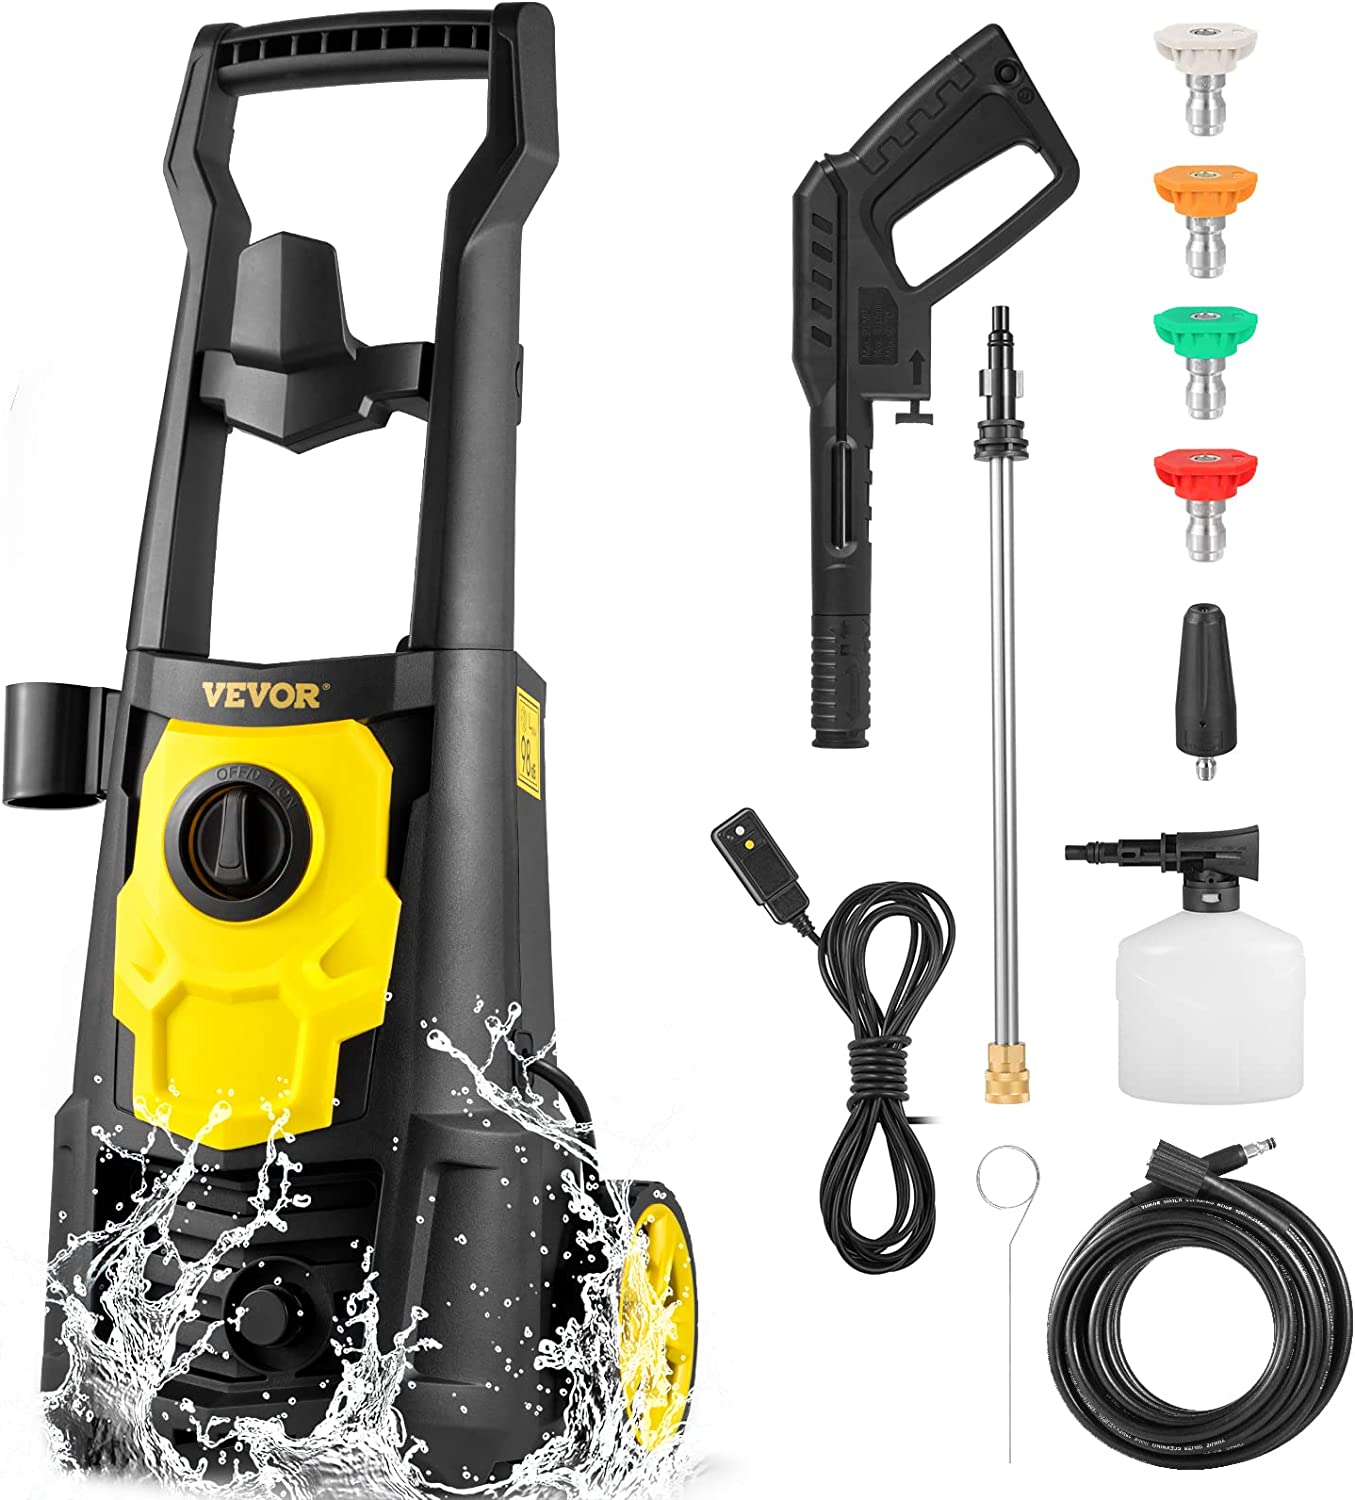 VEVOR Electric Pressure Washer, 2000 PSI, Max. 1.76 GPM Power Washer w 30 ft Hose, 5 Quick Connect Nozzles, Foam Cannon, Portable to Clean Patios, Cars, Fences, Driveways, ETL Listed